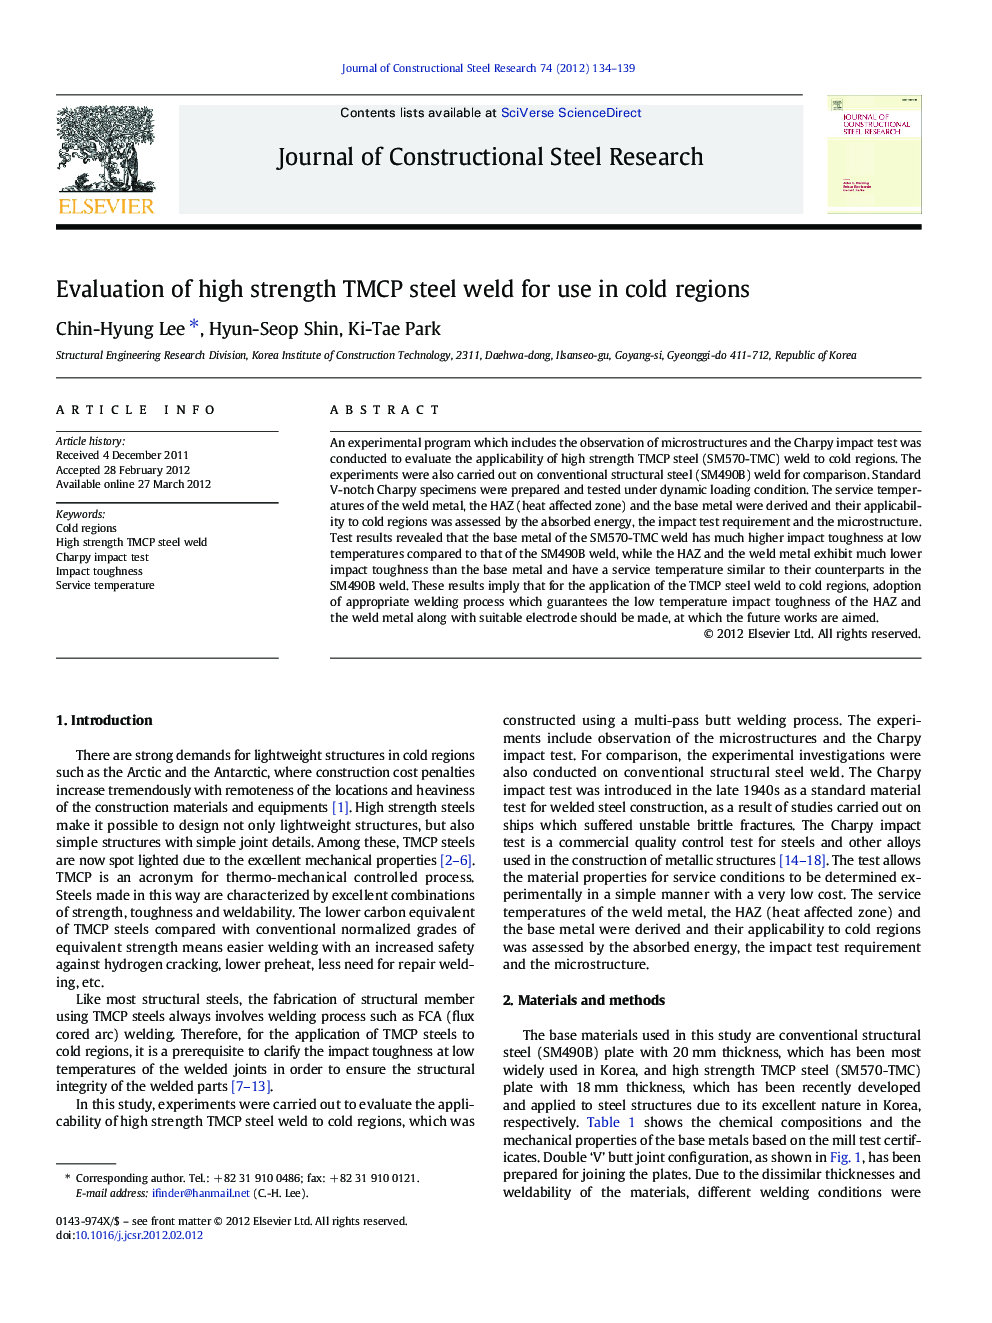 Evaluation of high strength TMCP steel weld for use in cold regions